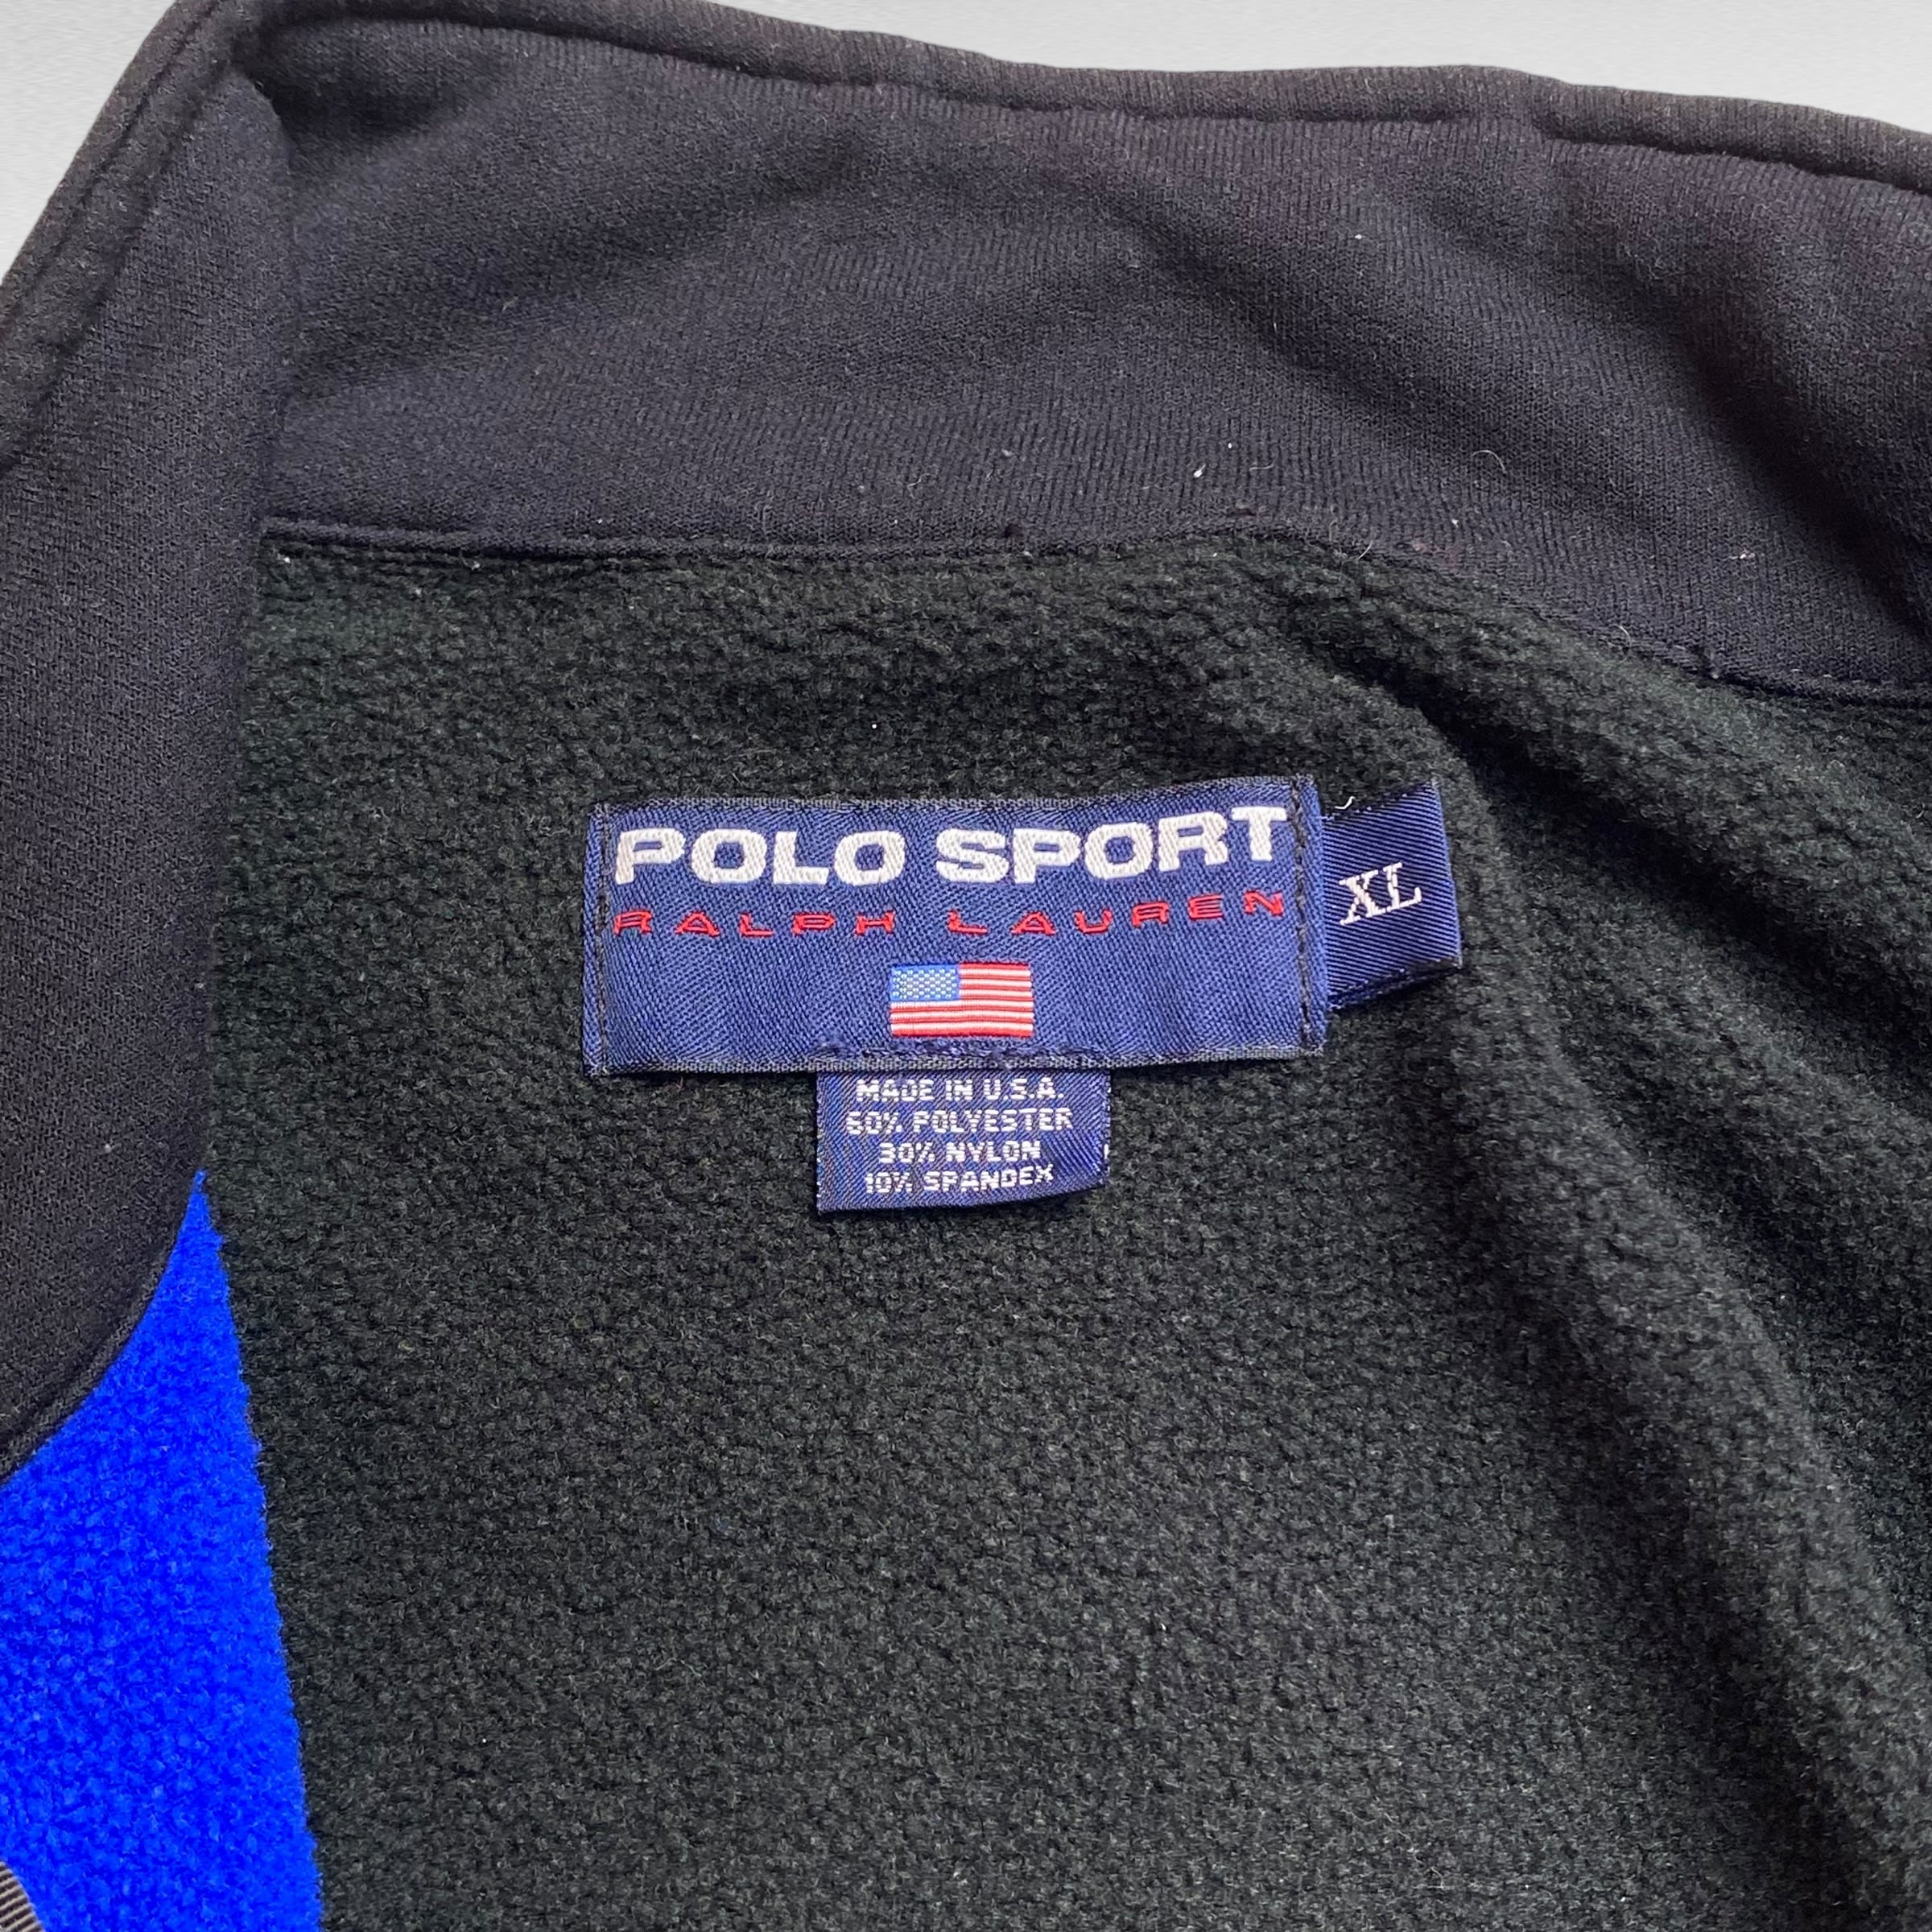 POLO SPORTS ジャージ made in USA